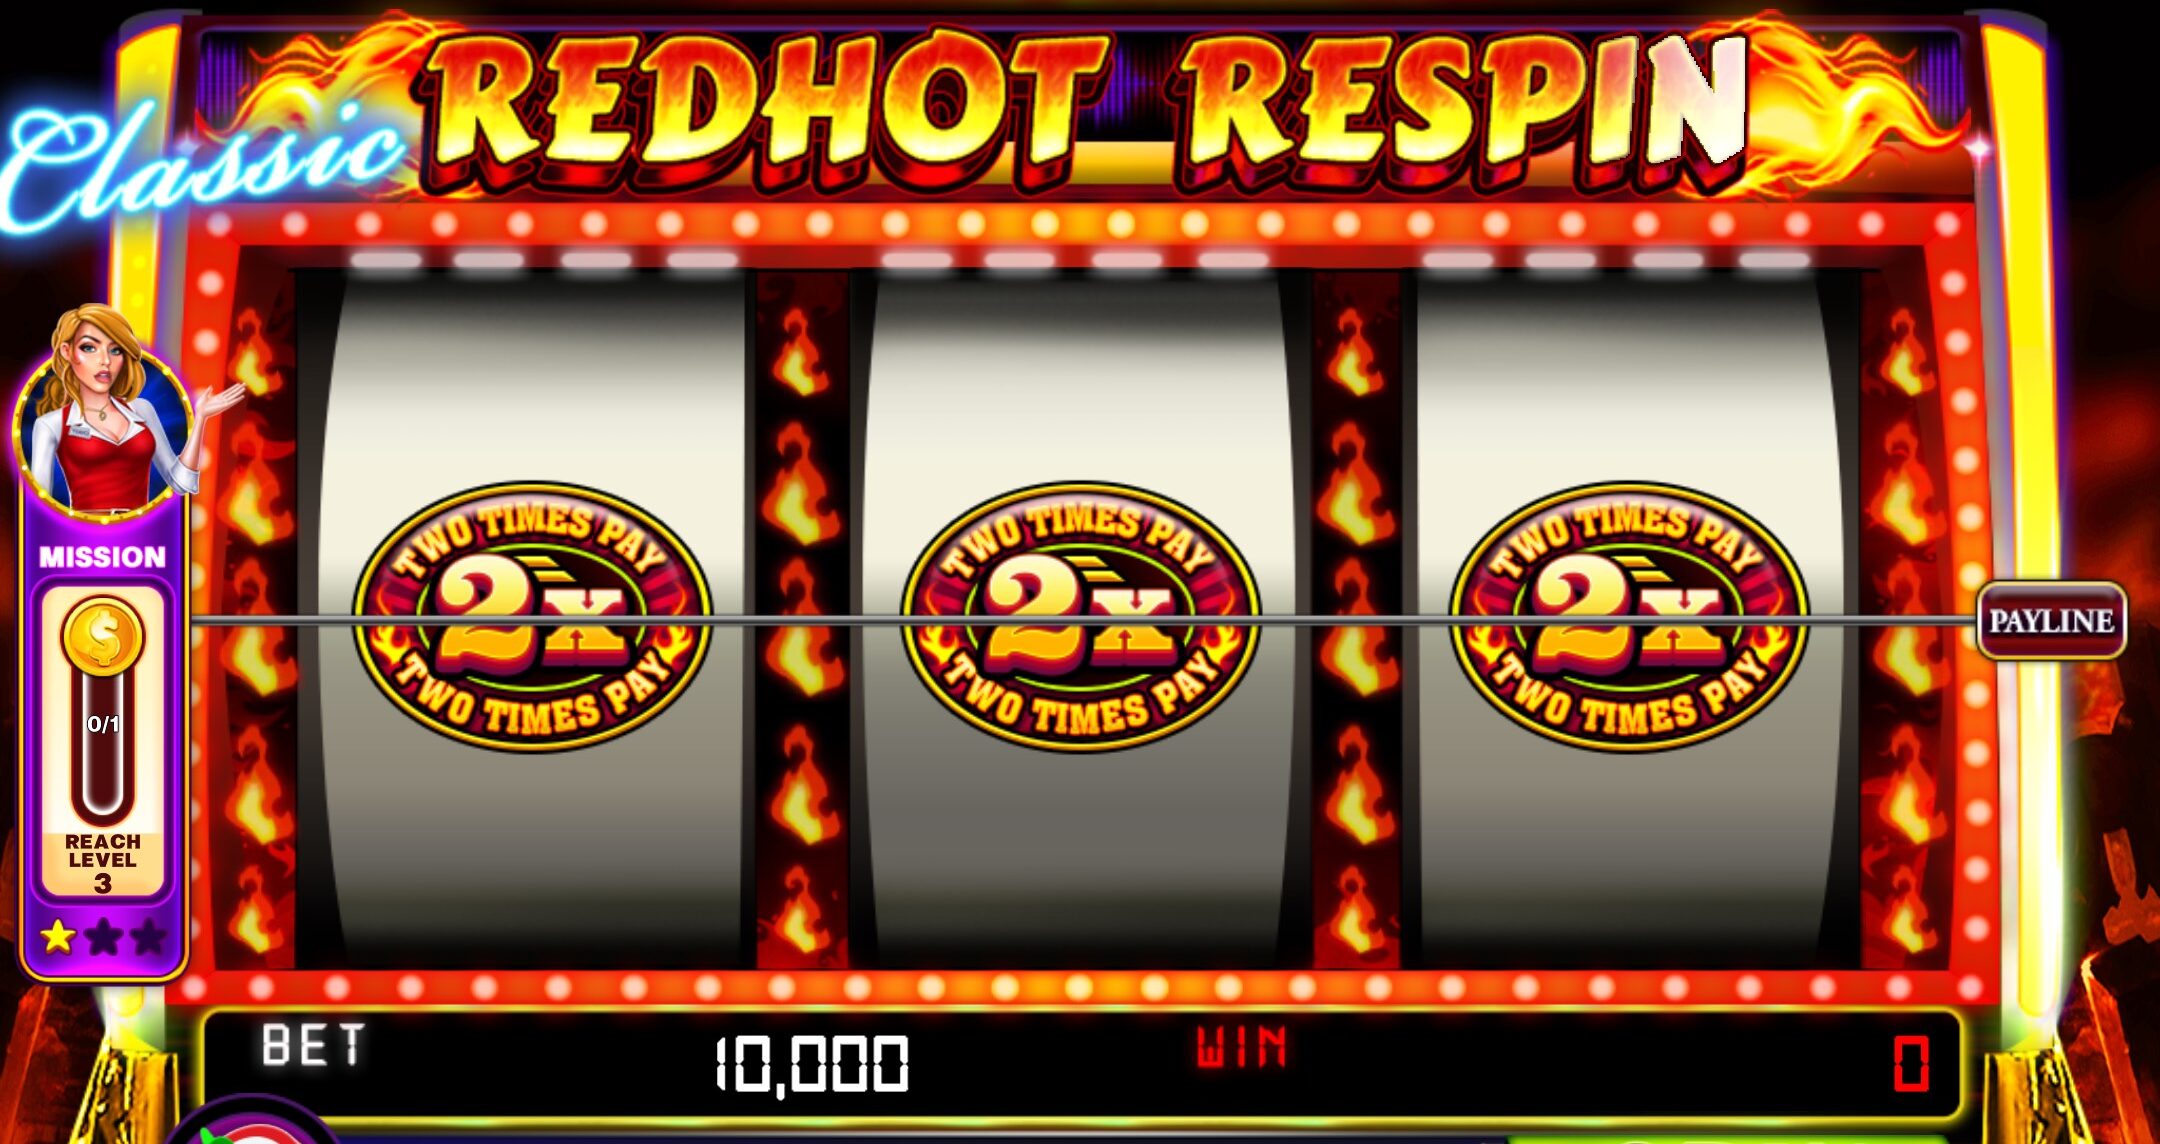 Re-Spin Redhot